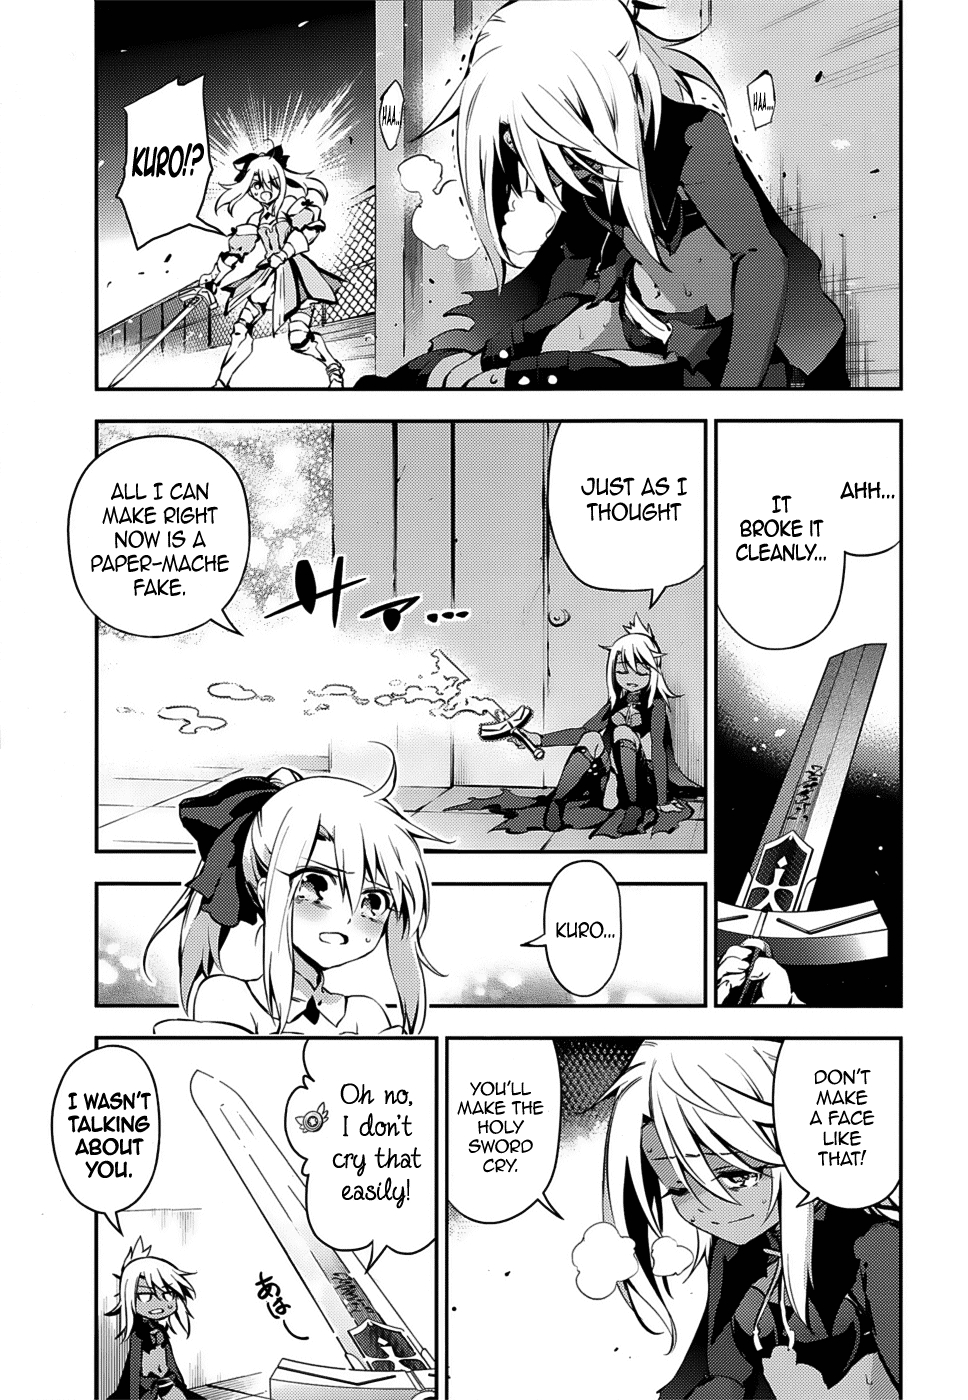 Fate/kaleid liner PRISMA☆ILLYA 3rei!! Vol. 2 Ch. 8 A Wimpy Little Sister's Welcome